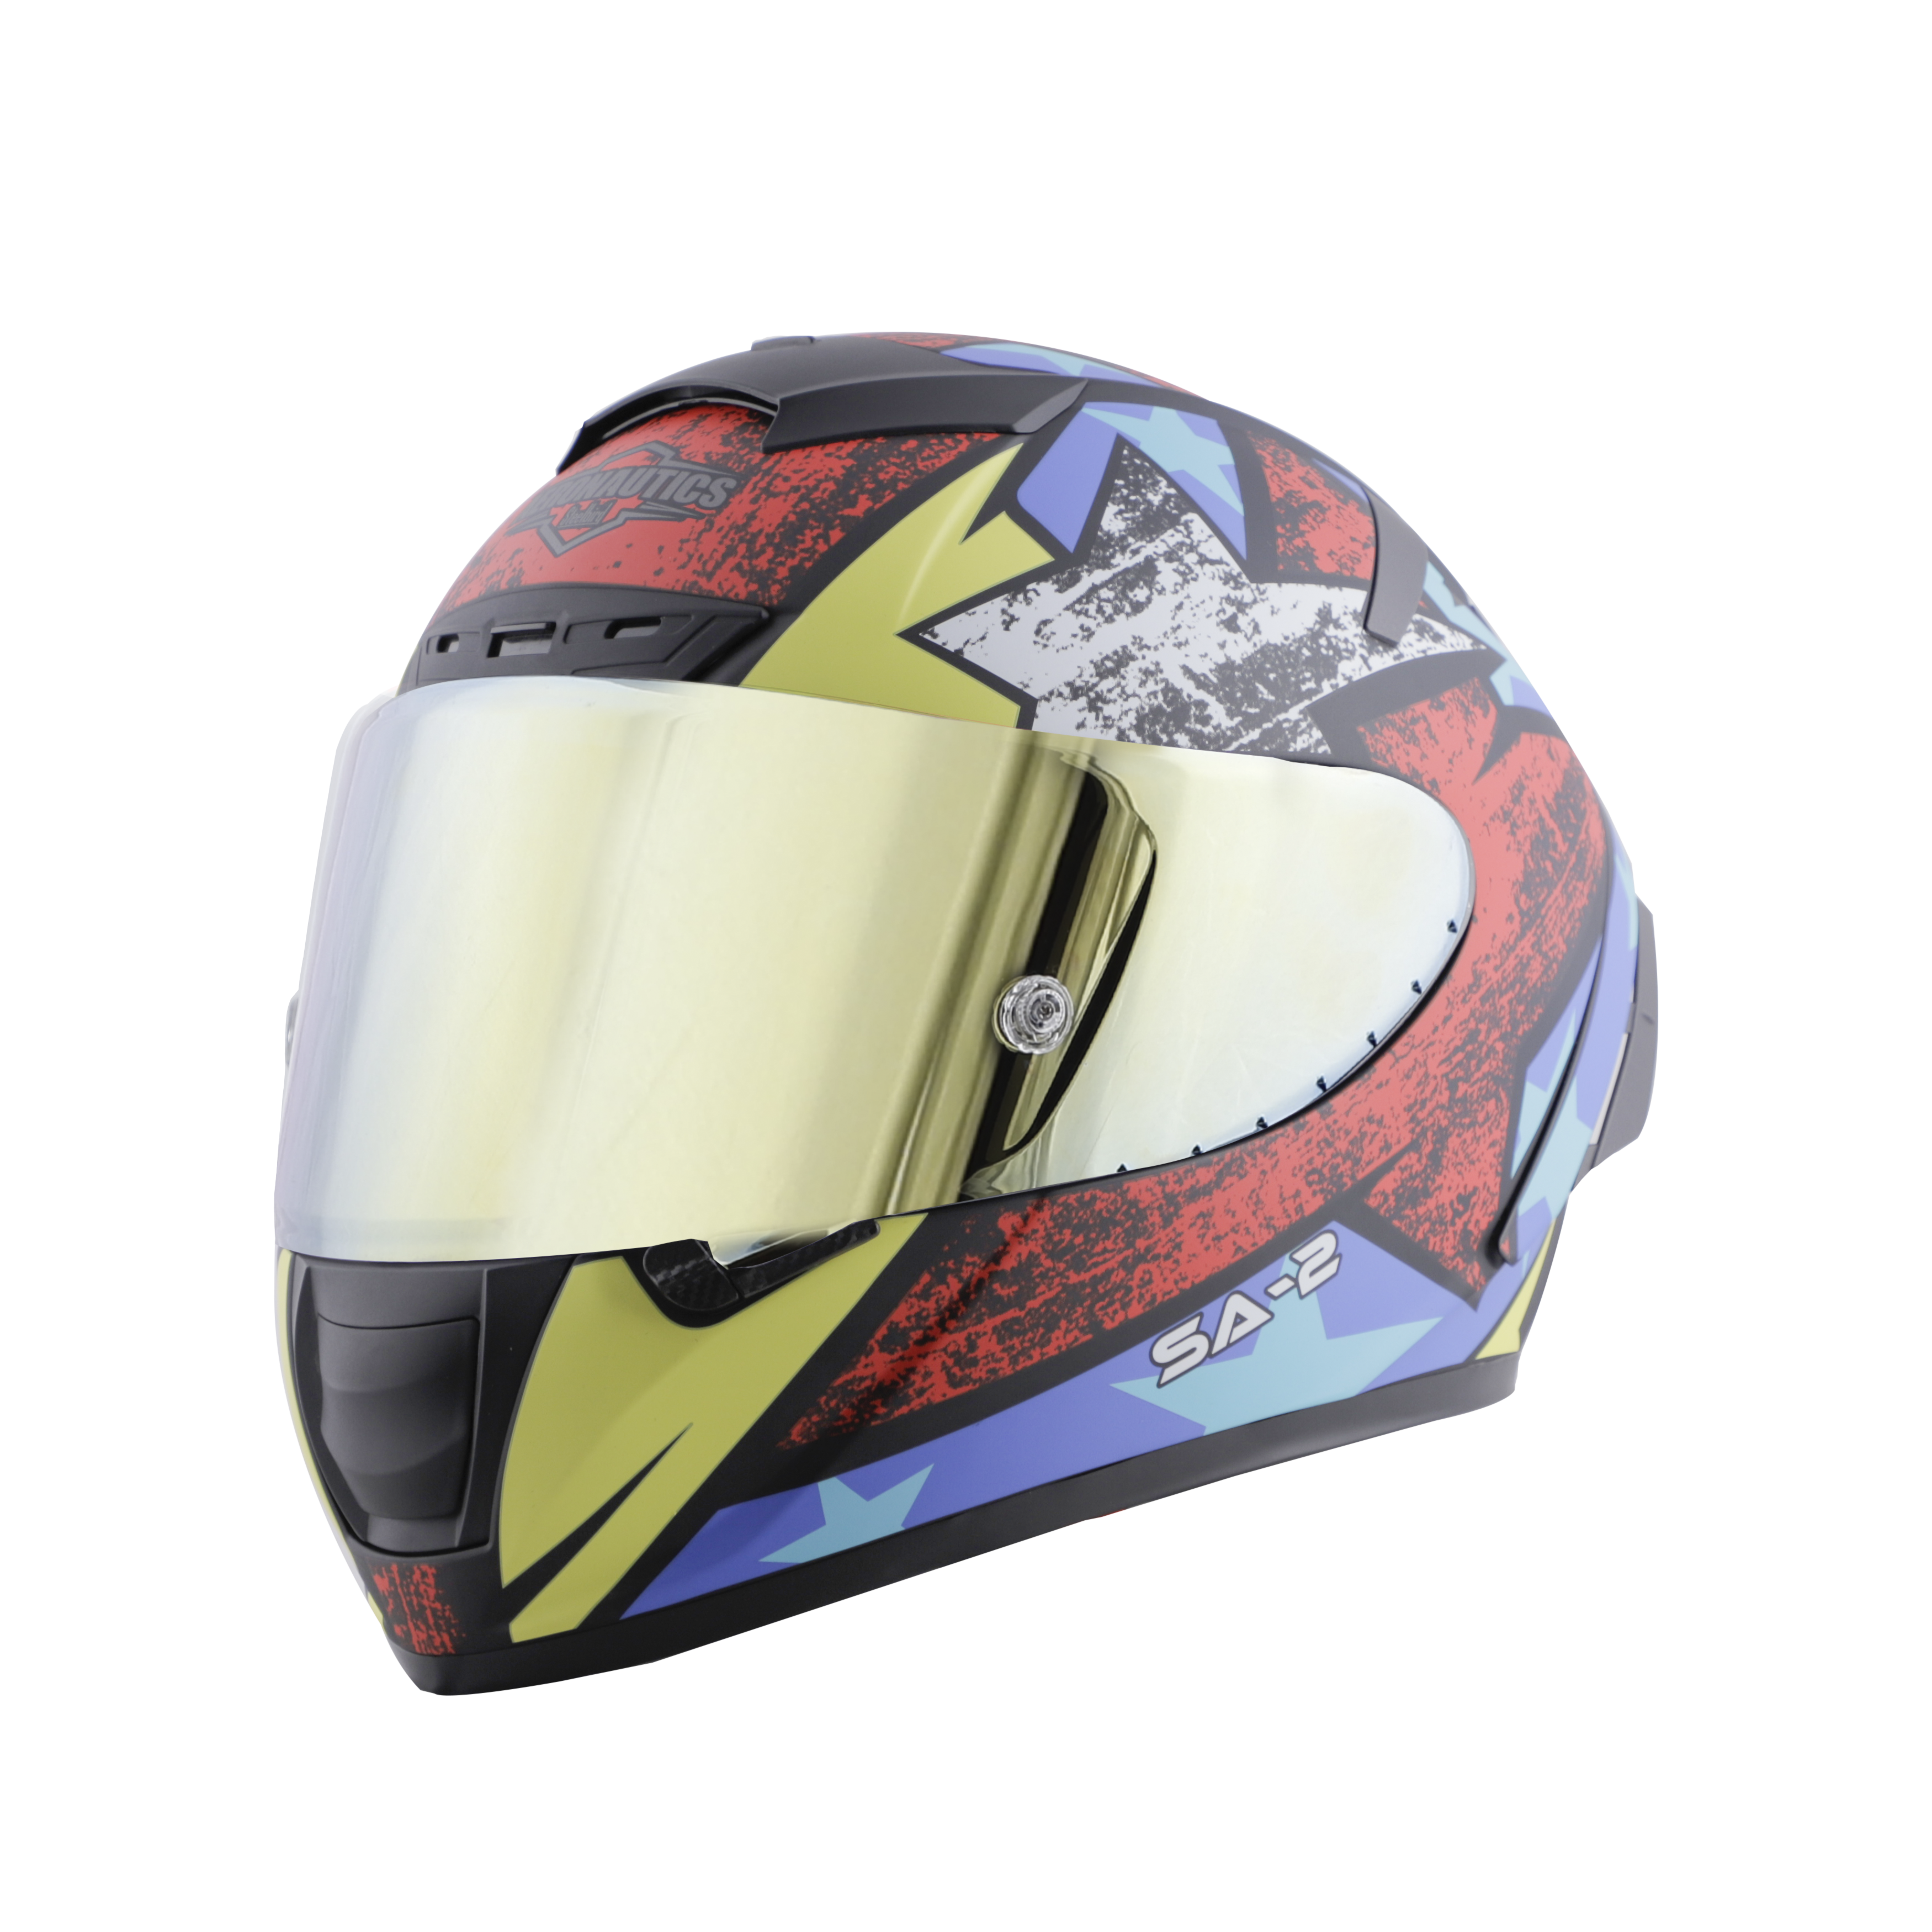 SA-2 STAR MAT BLACK WITH RED FITTED WITH CLEAR VISOR EXTRA CHROME GOLD VISOR FREE (WITH ANTI-FOG SHIELD HOLDER)